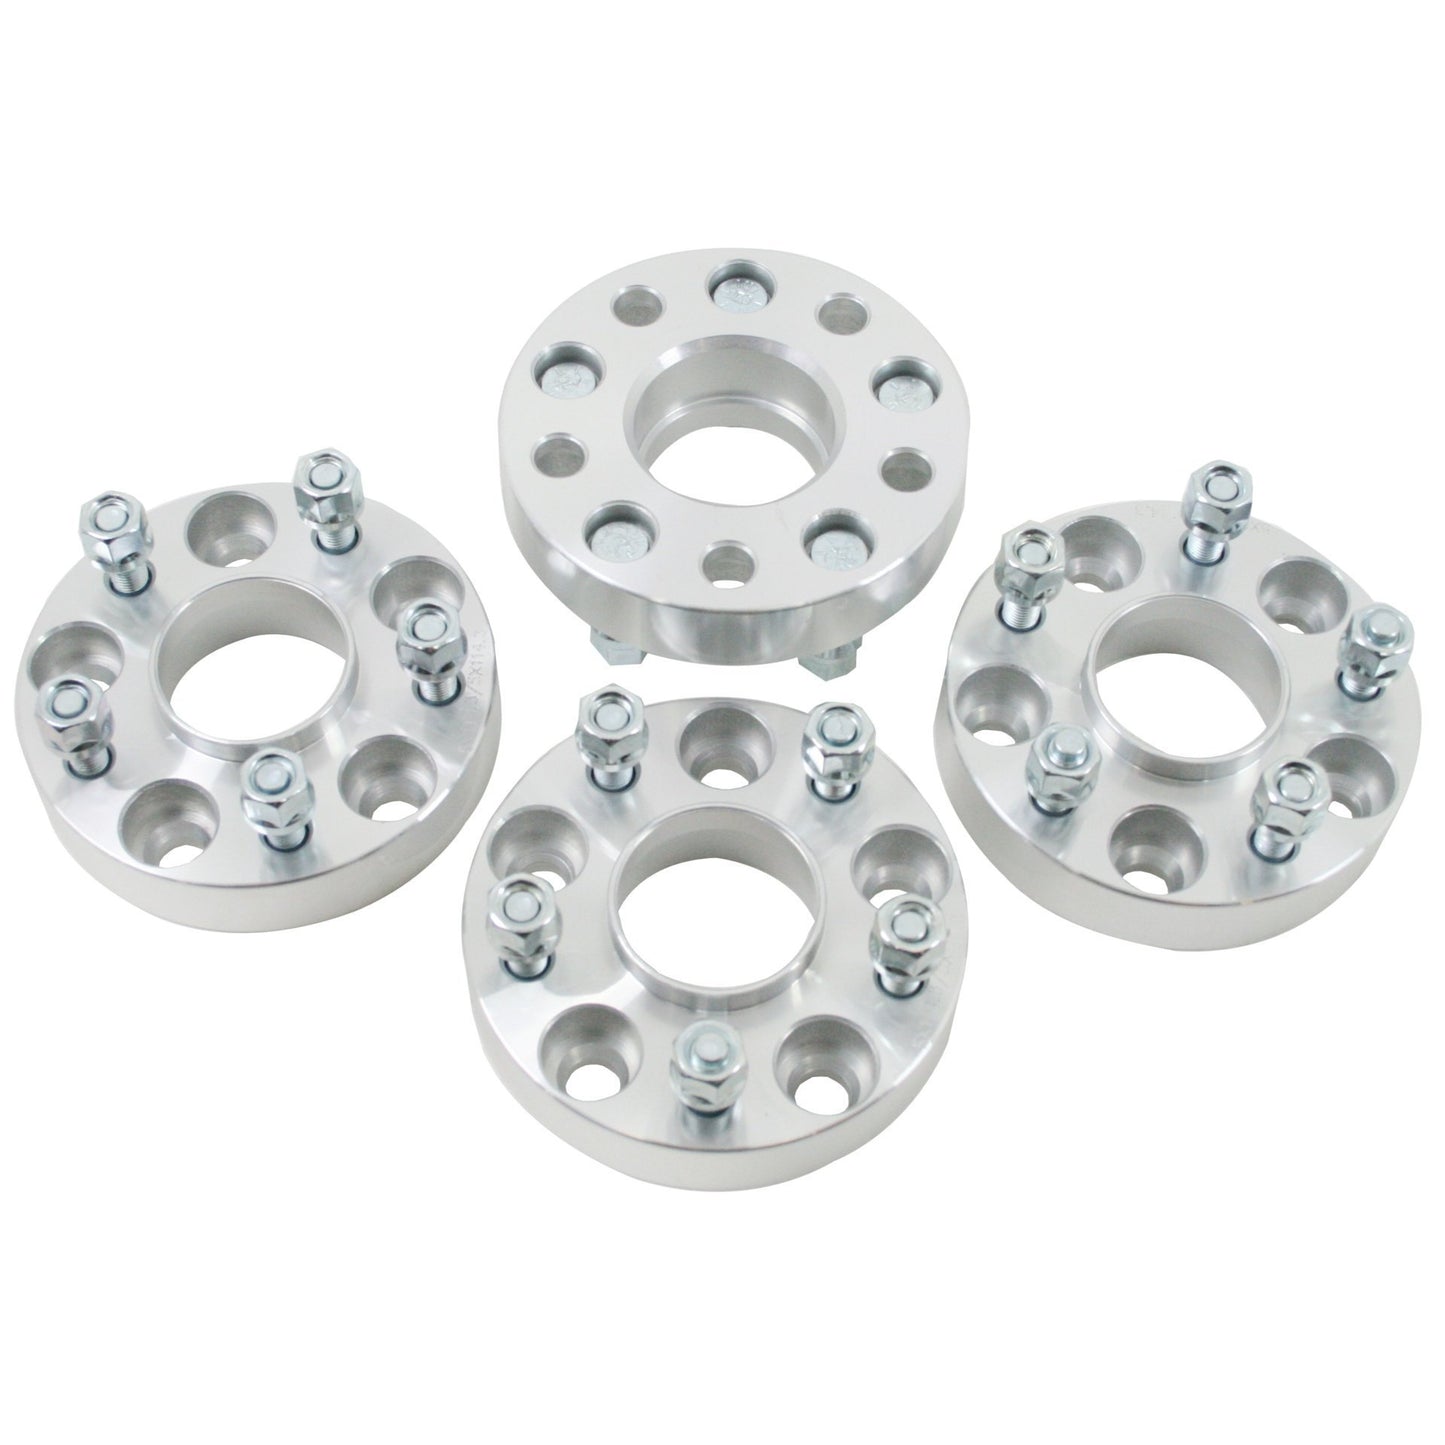 50mm Wheel Spacers for Nissan Navara D22 1997-2004 -  - sold by Direct4x4